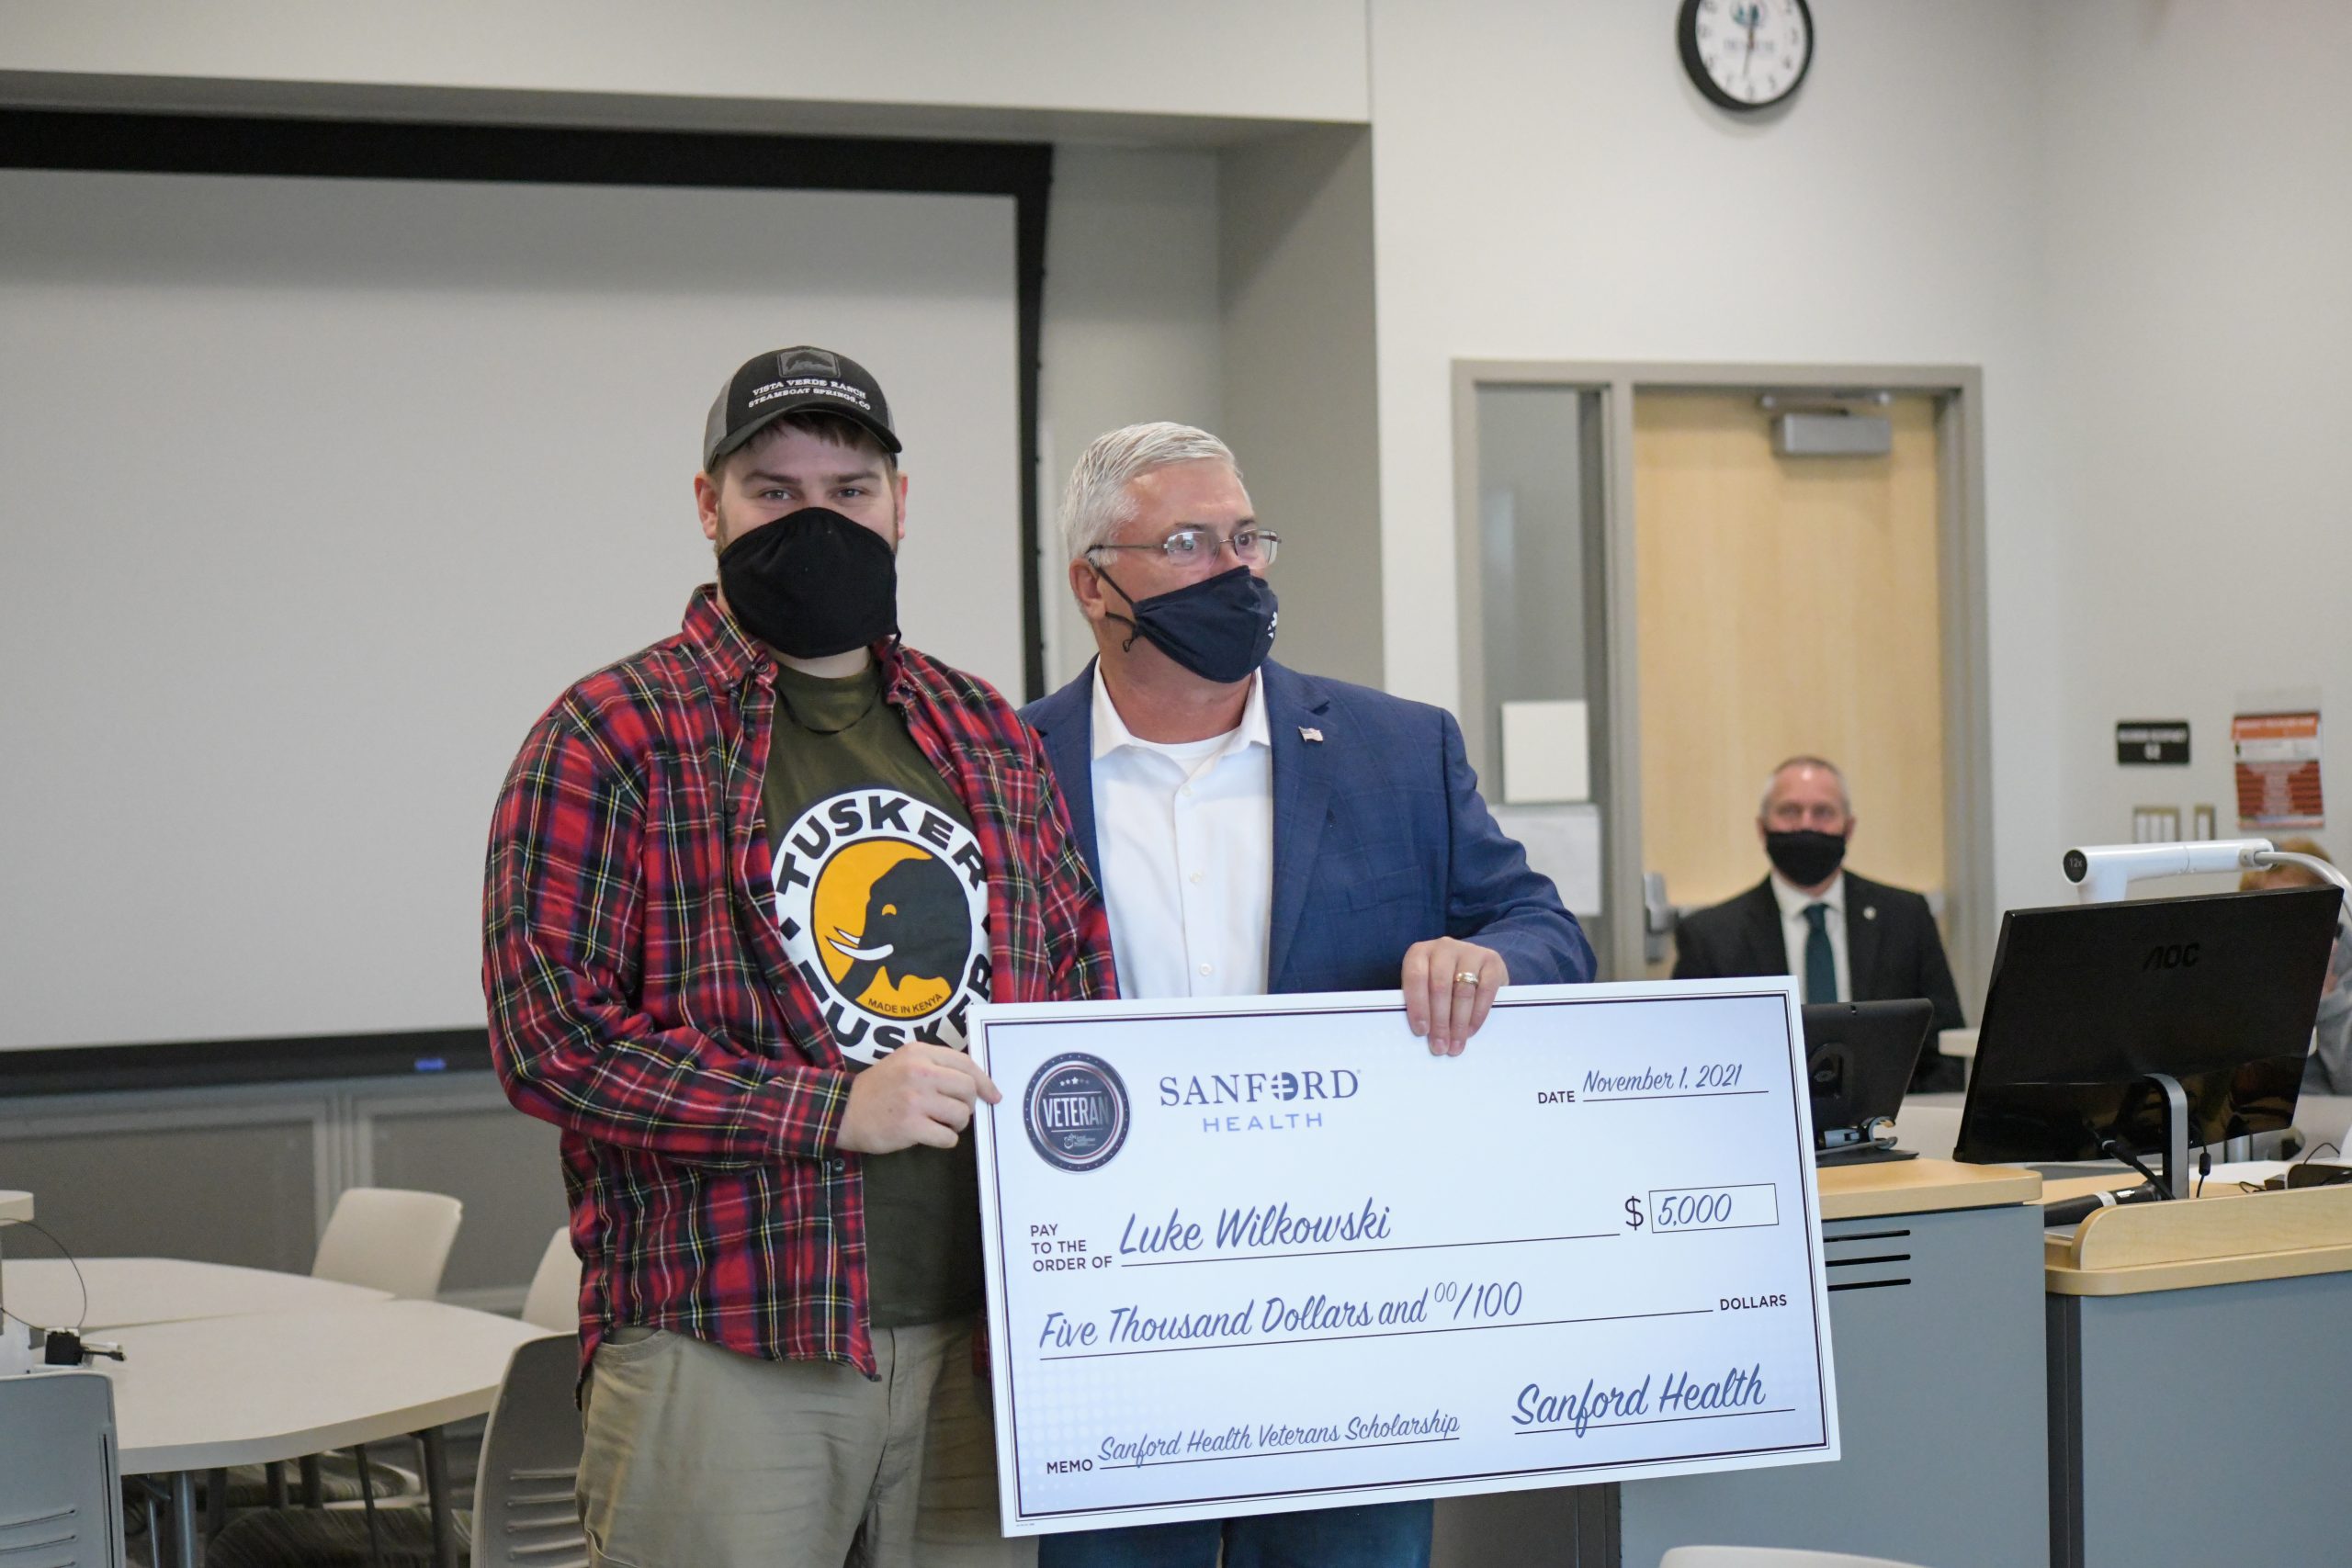 Captain Paul Weckman, director of veteran and military affairs at Sanford Health, presents an oversized check of $5000 to junior nursing student Luke Wilkowski, a veteran Specialist in the U.S. Army.